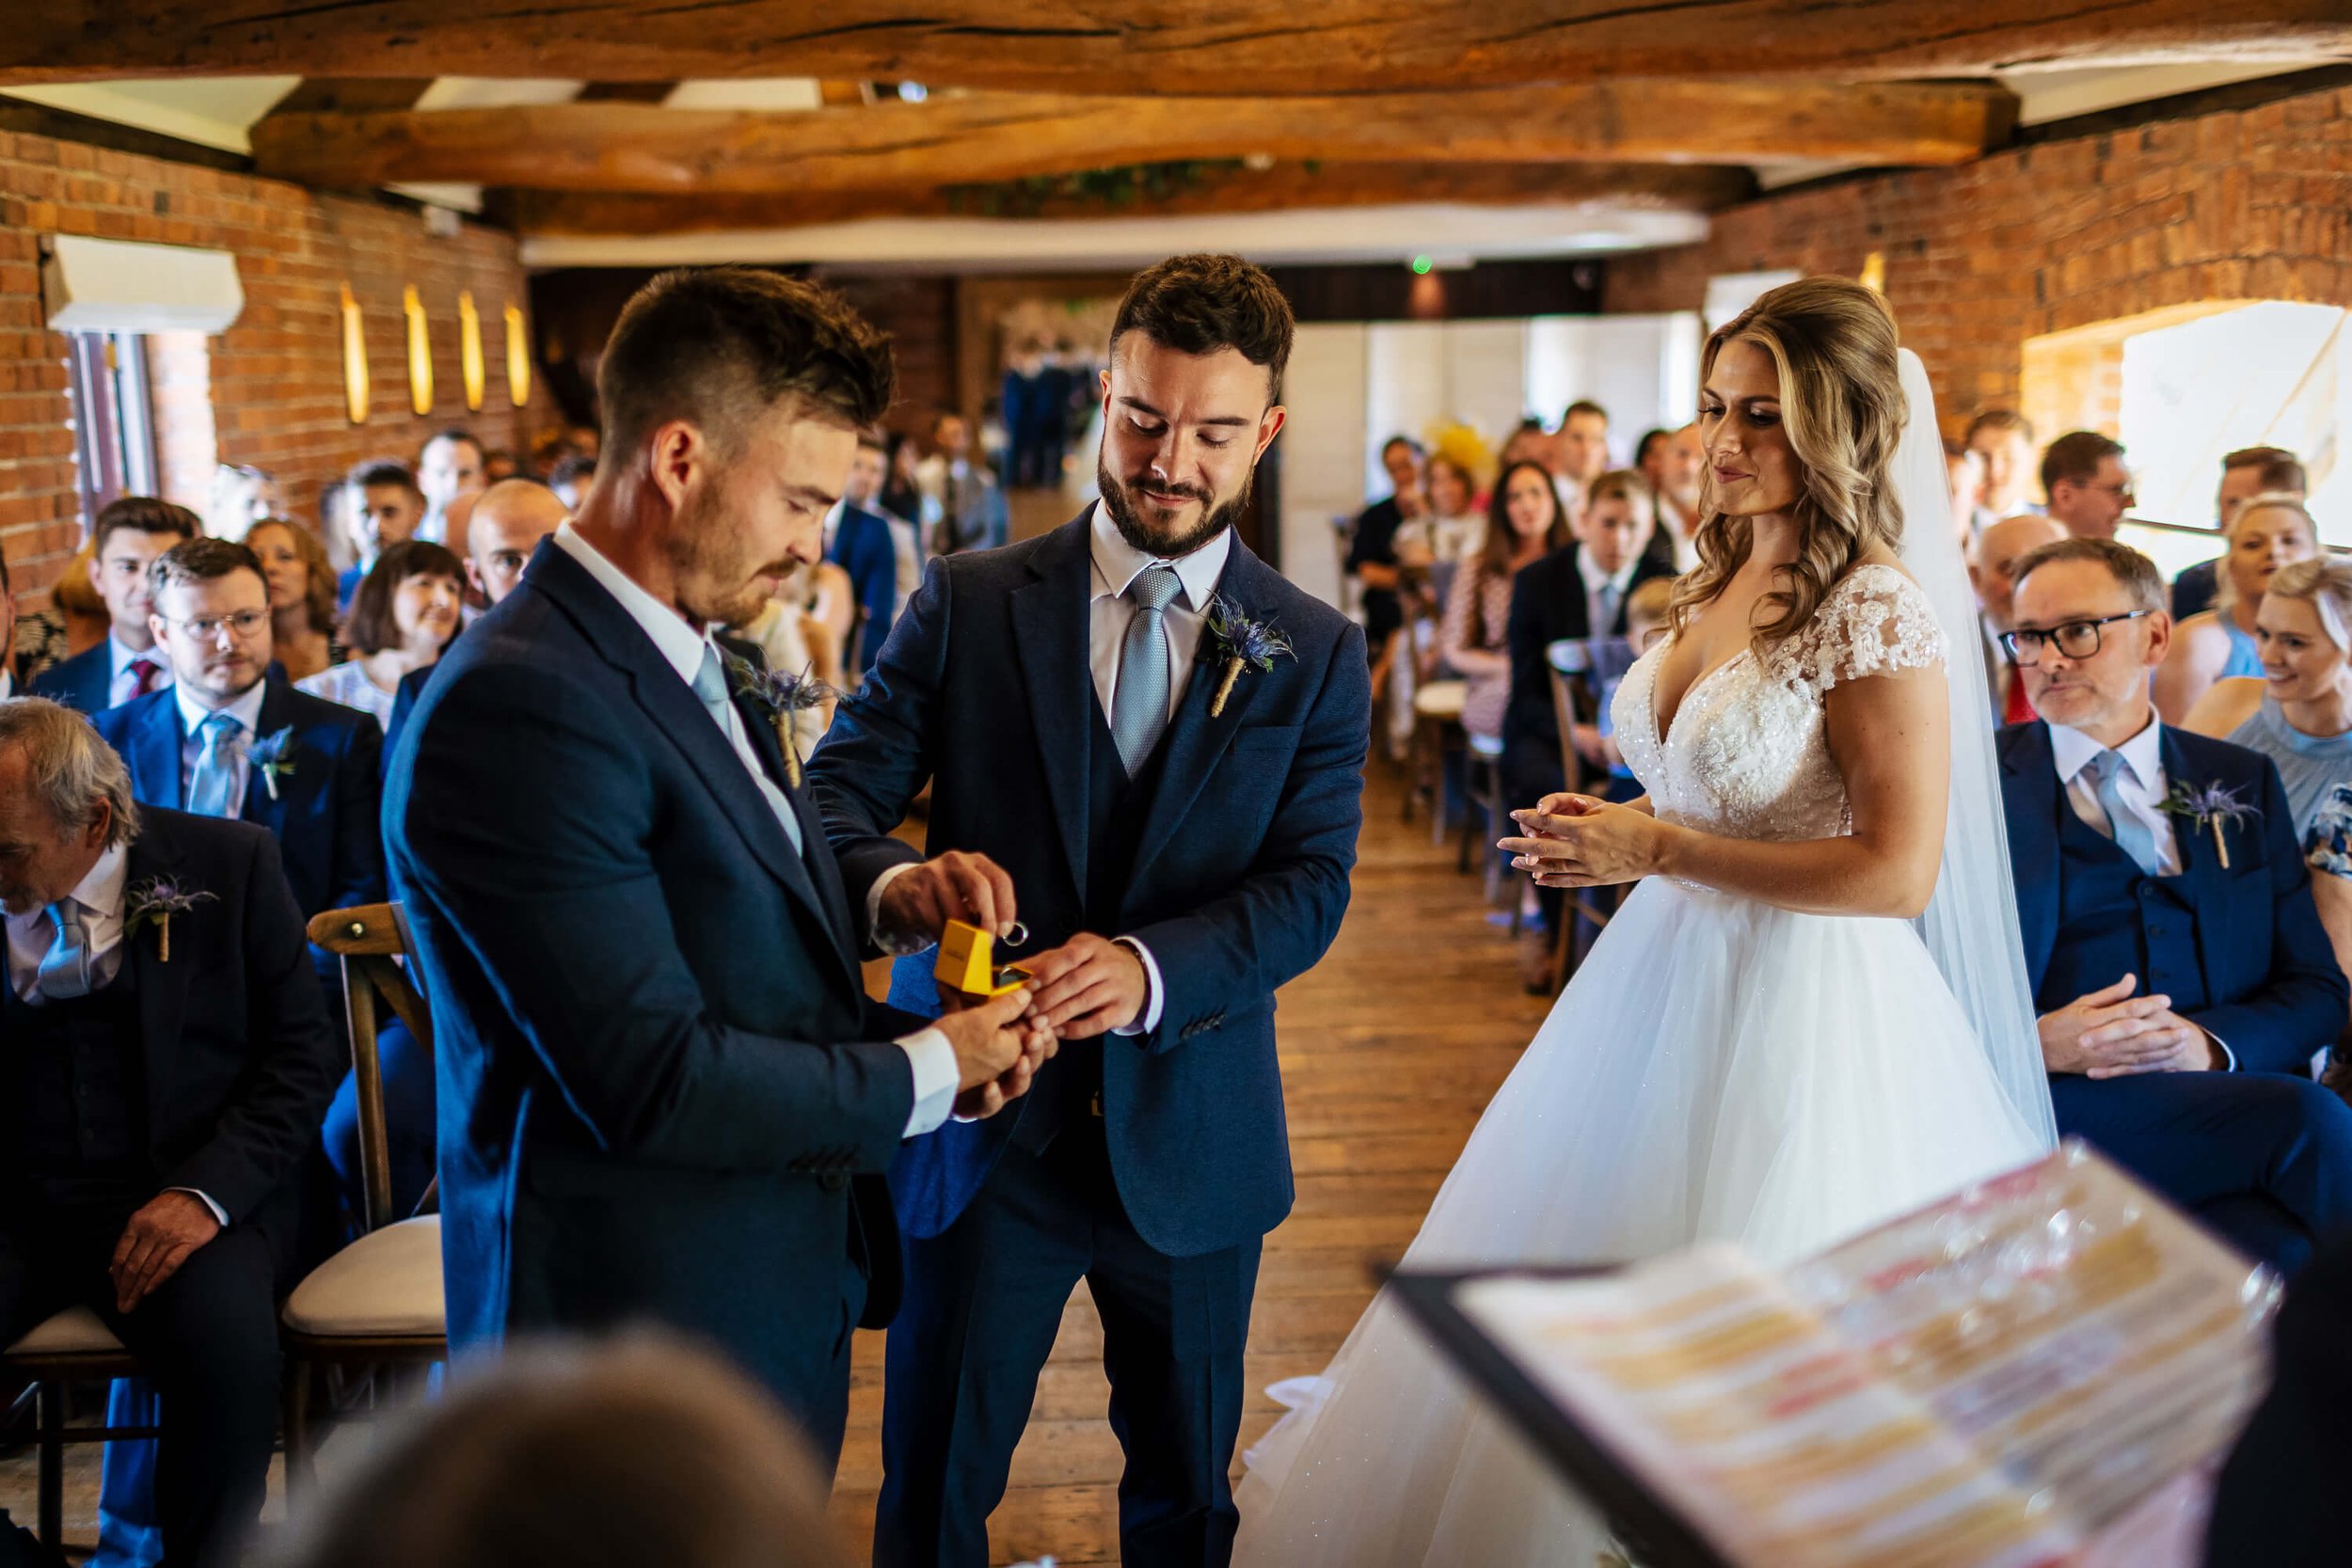 Best man hands the wedding ring to the groom during the ceremony